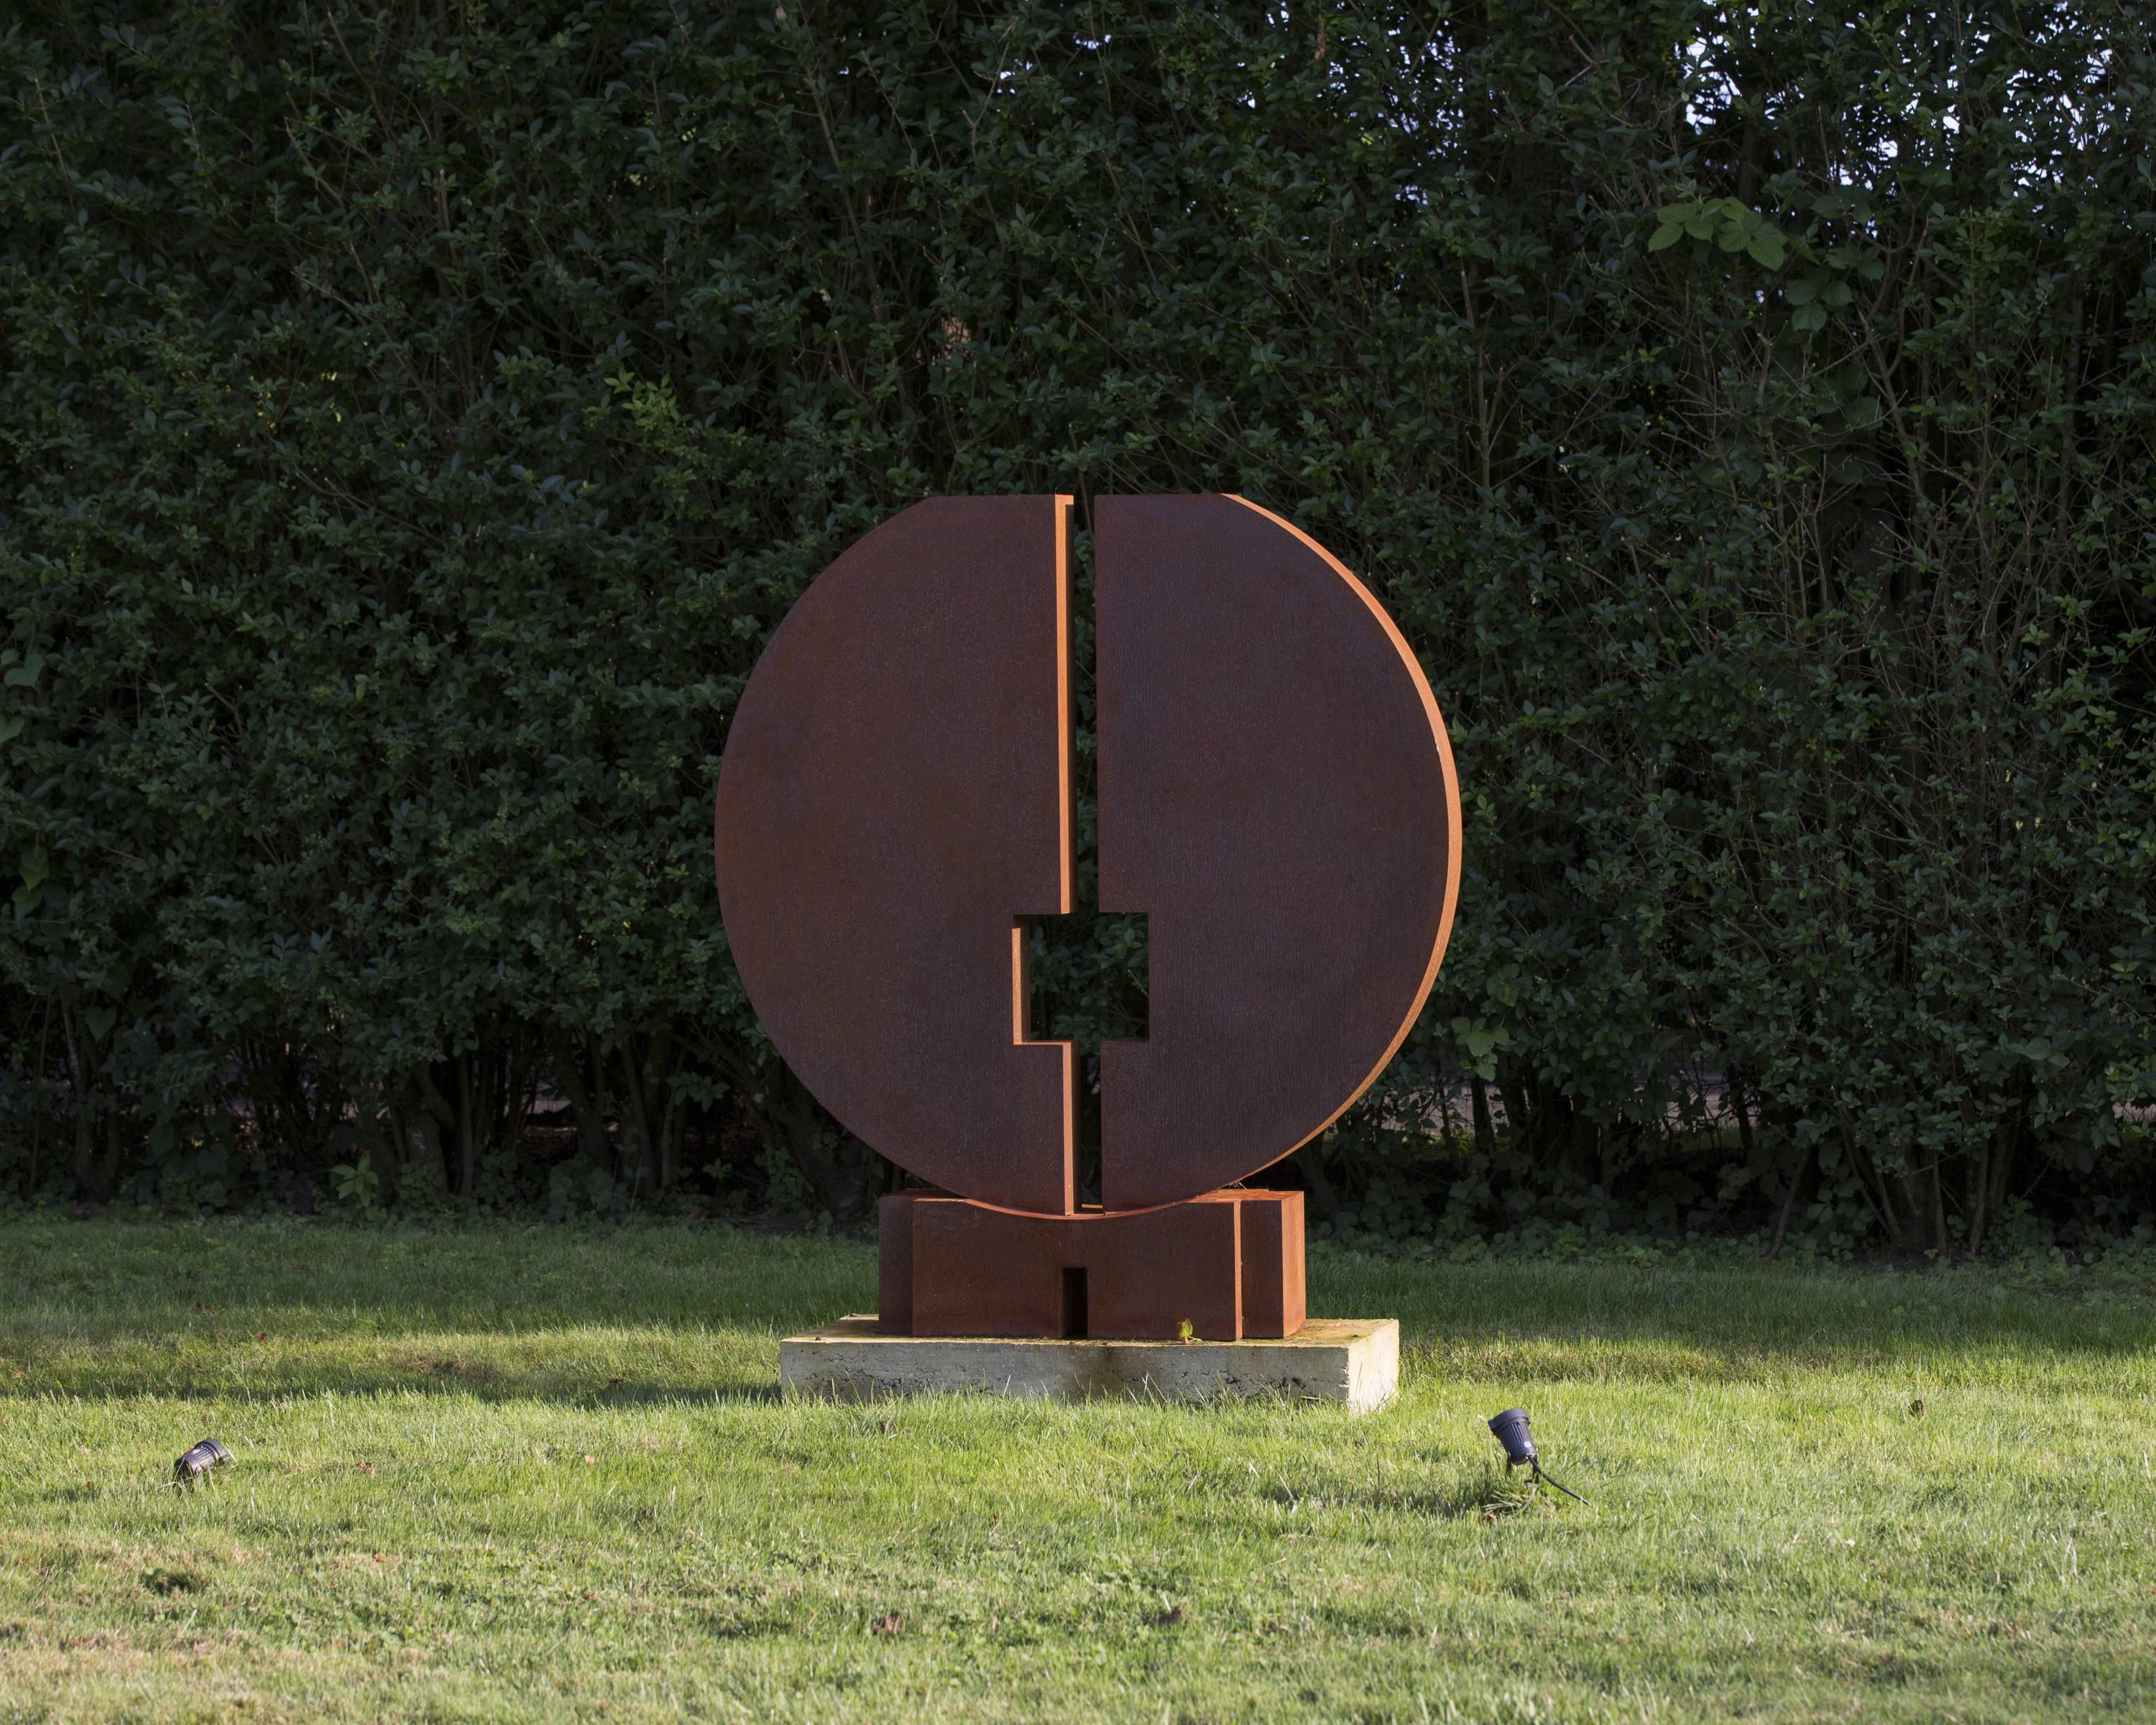 Examples of this patinated steel sculpture have been exhibited throughout Europe since the early 1980s, most notably as a tribute to the artist in 2008 in his birthplace and childhood home of Teana, Italy.